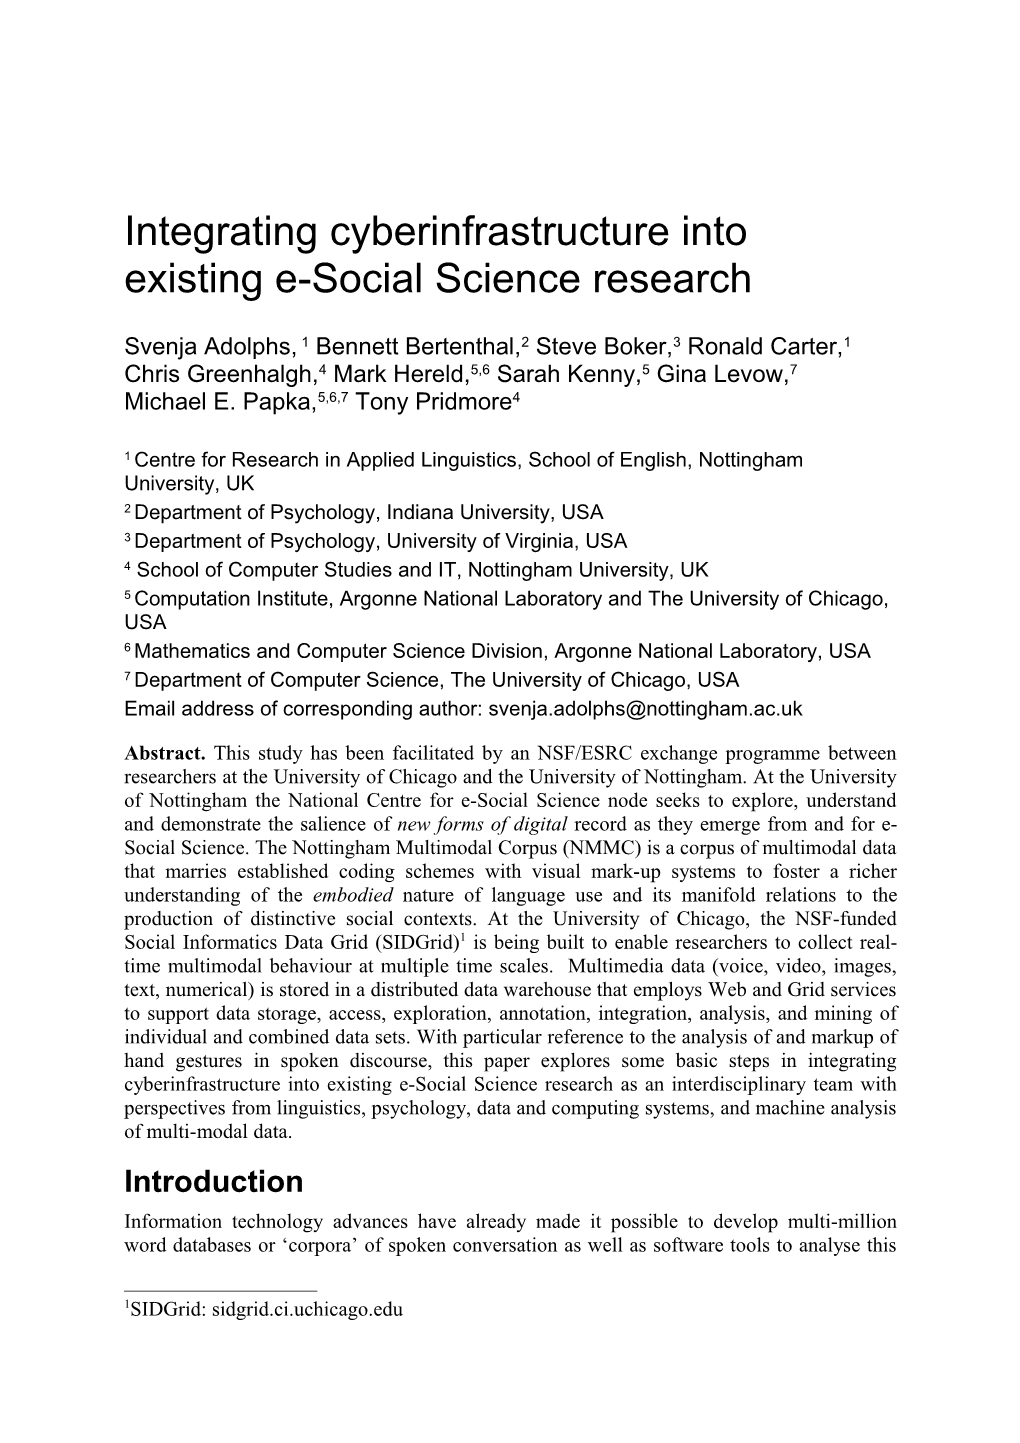 Integrating Cyberinfrastructure Into Existing Esocial Science Research